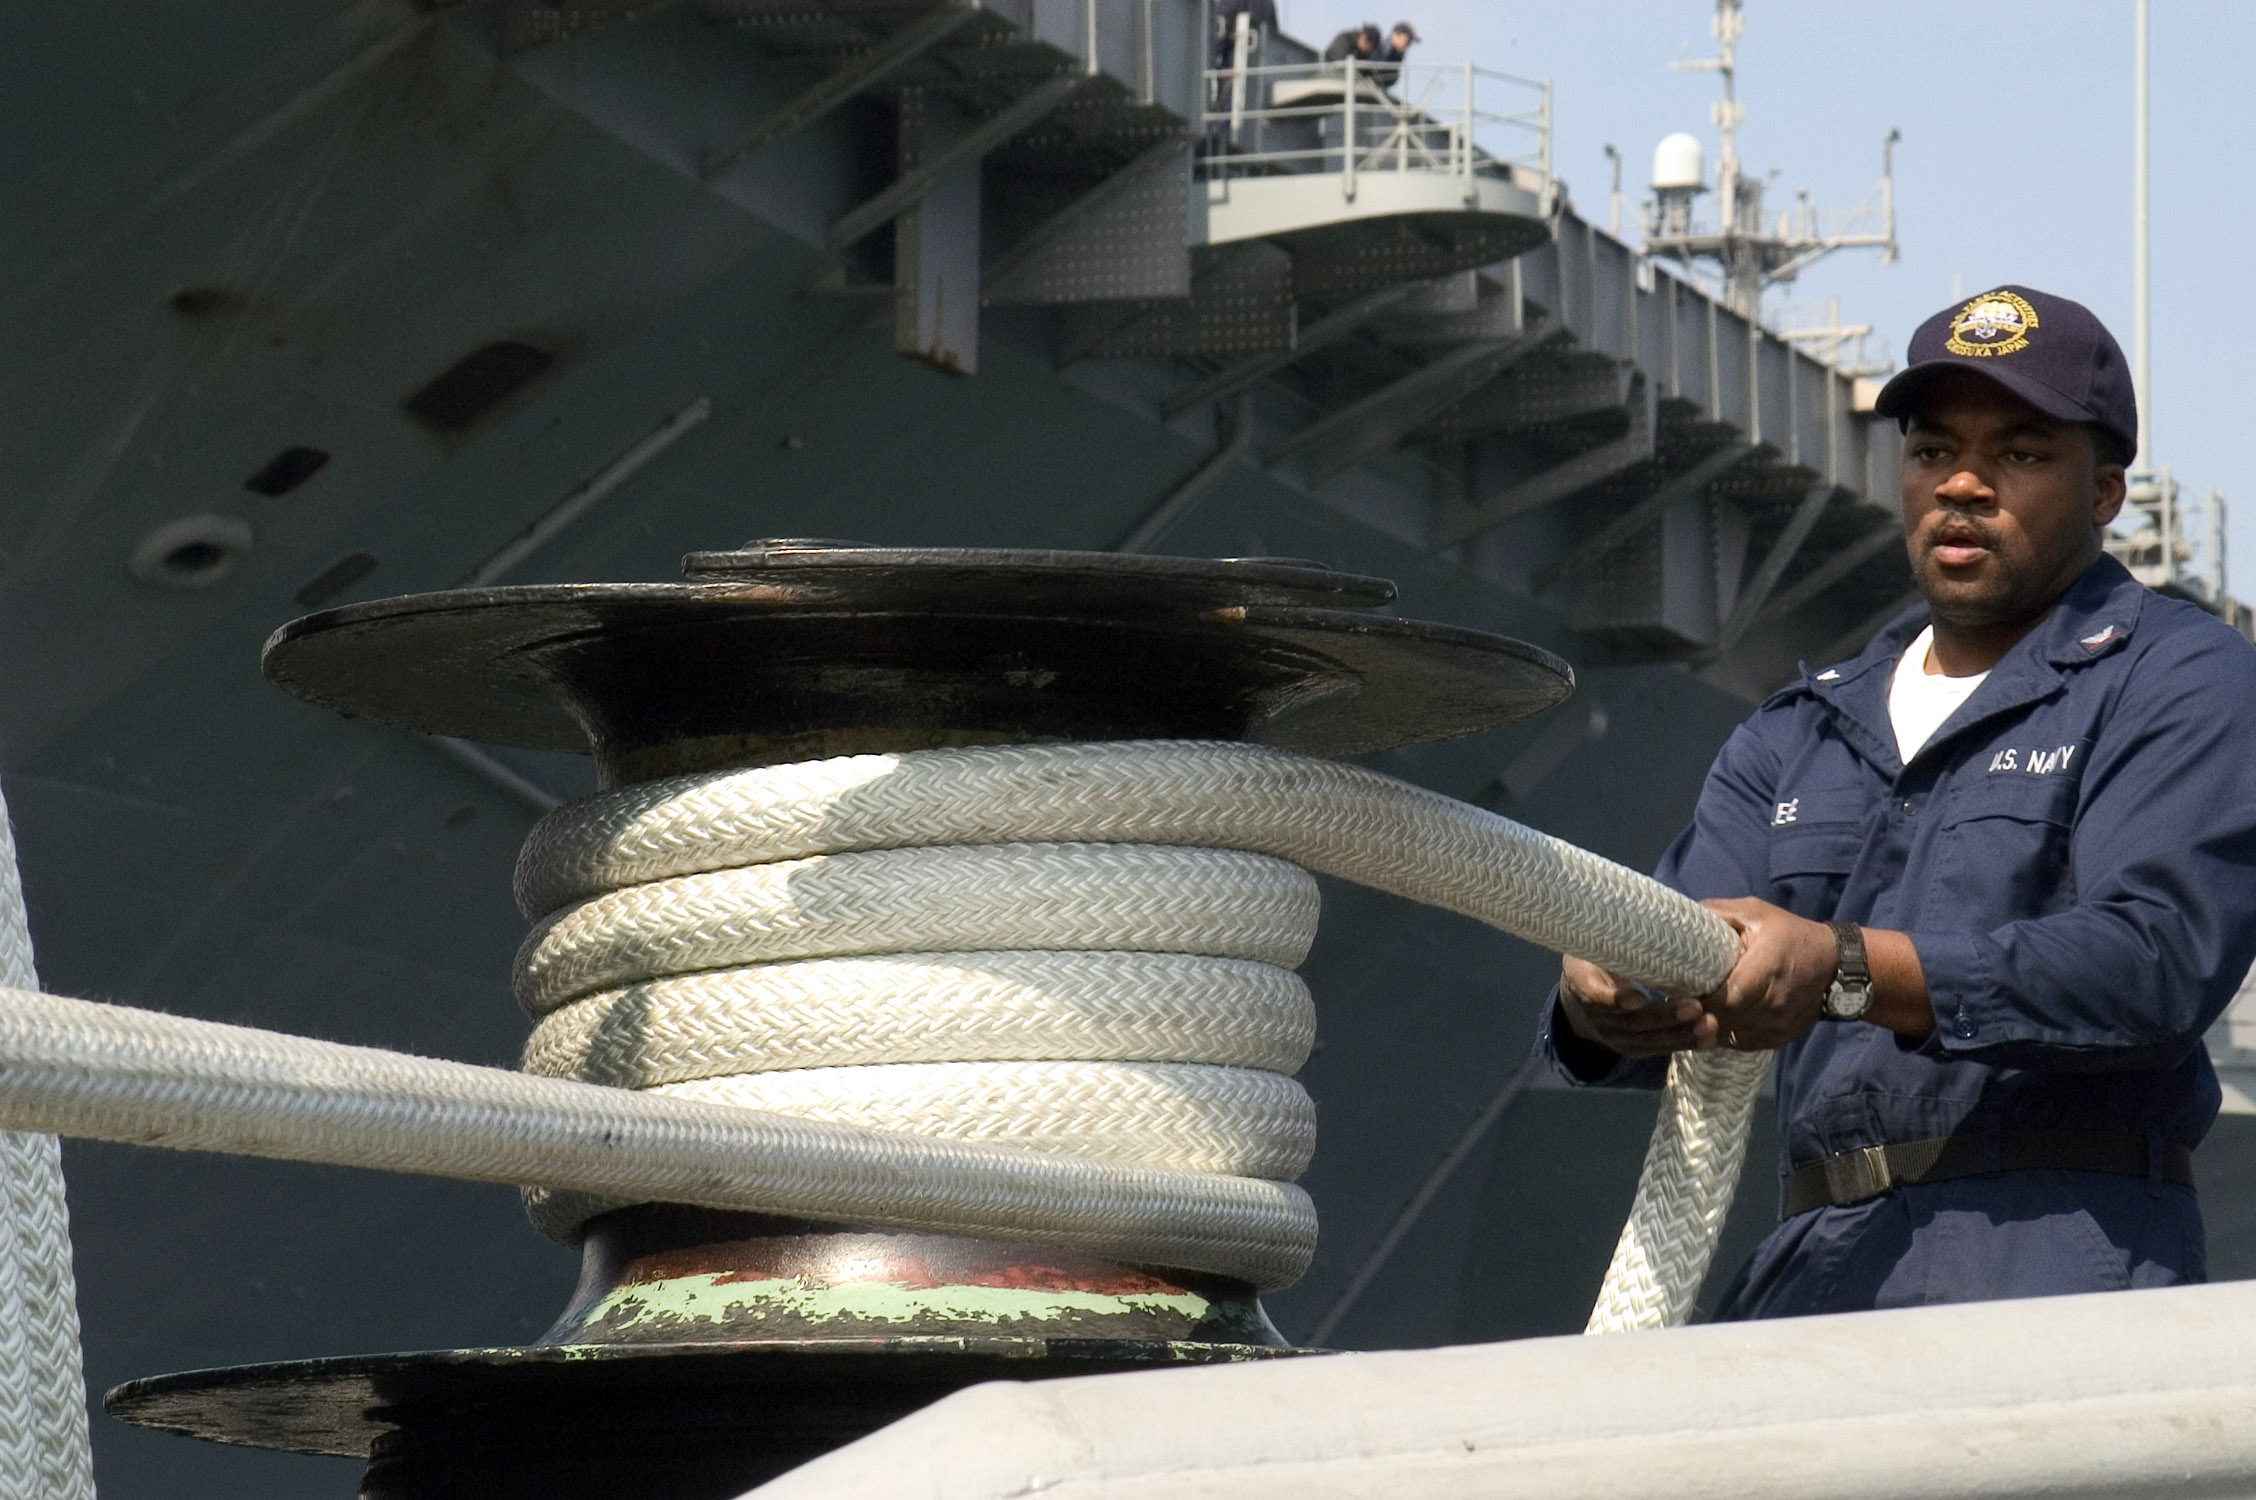 US Navy 070322-N-9520G-002 Boatswain's Mate 3rd Class Rueben Lee uses a capstan to remove slack on a double-braided line used on tugboats moored at Commander Fleet Activities Yokosuka